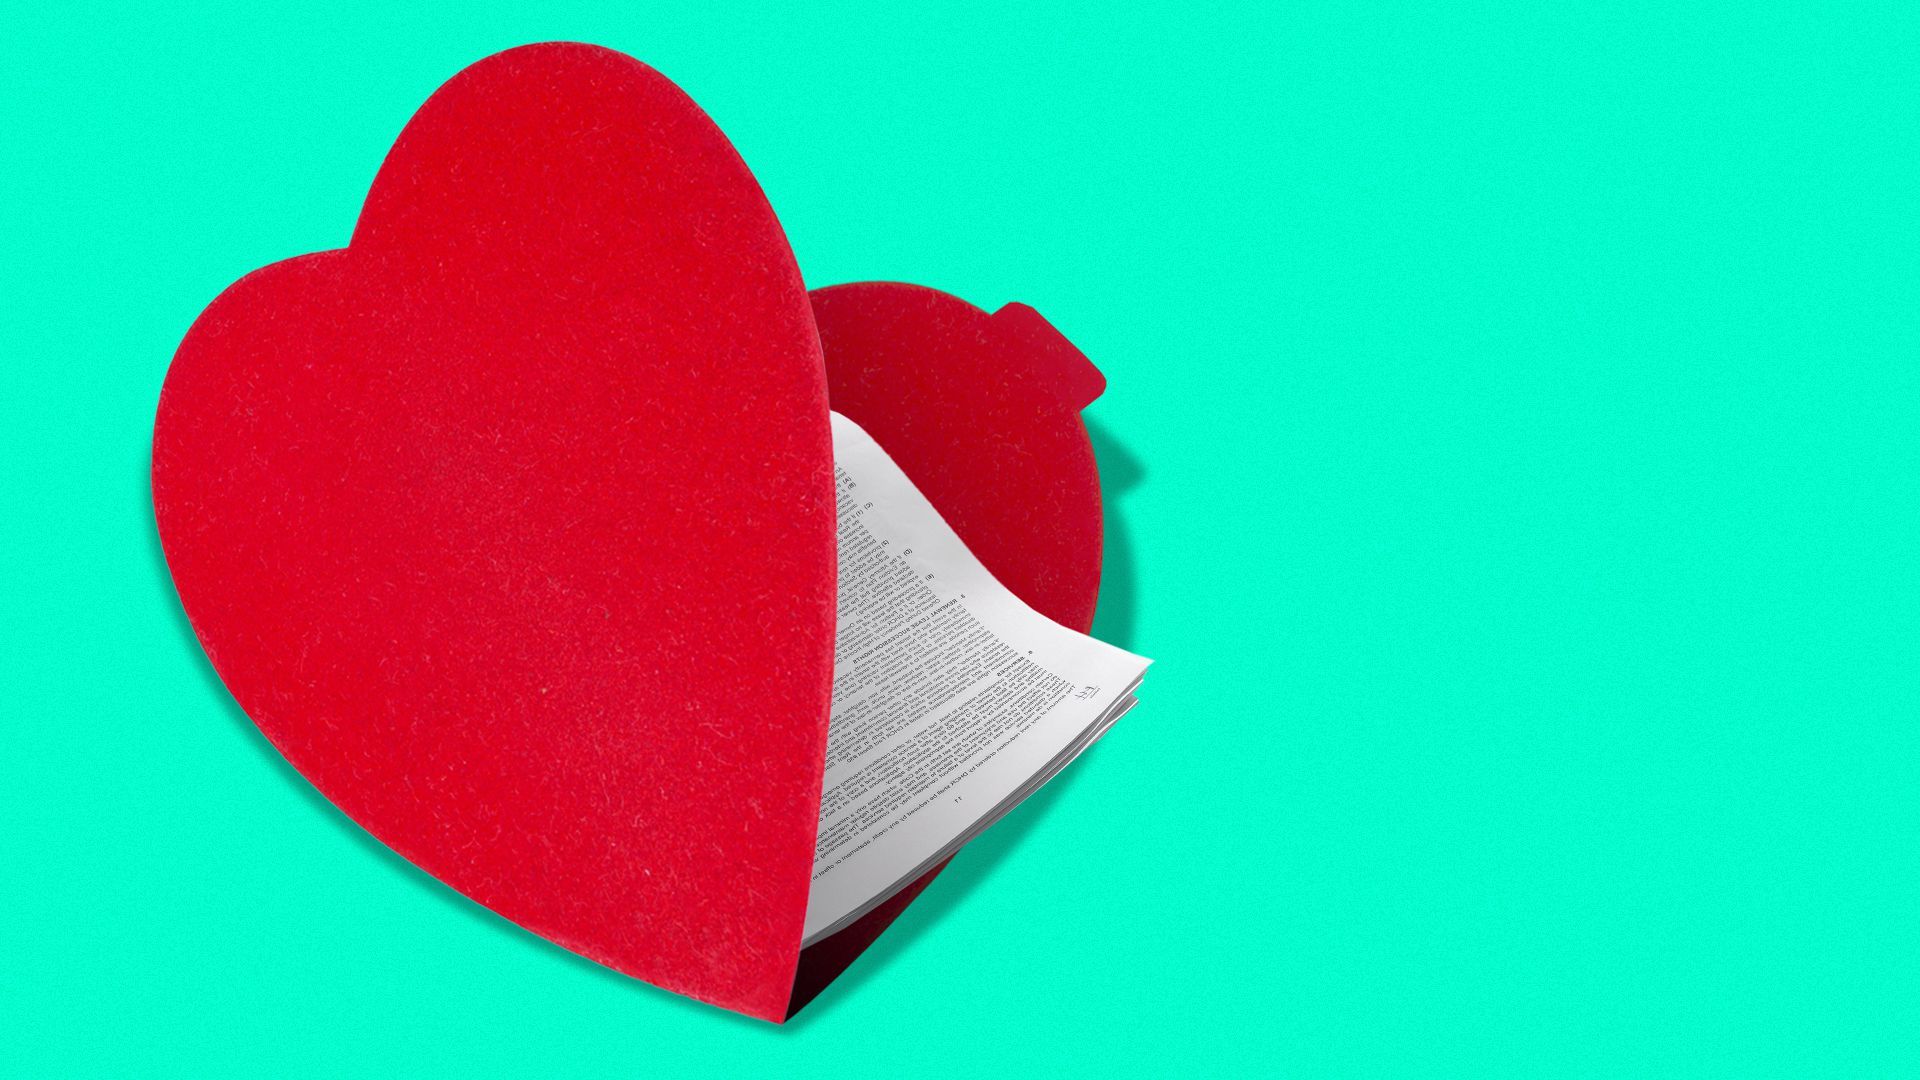 Illustration of a heart-shaped manila folder opening to reveal complex documents